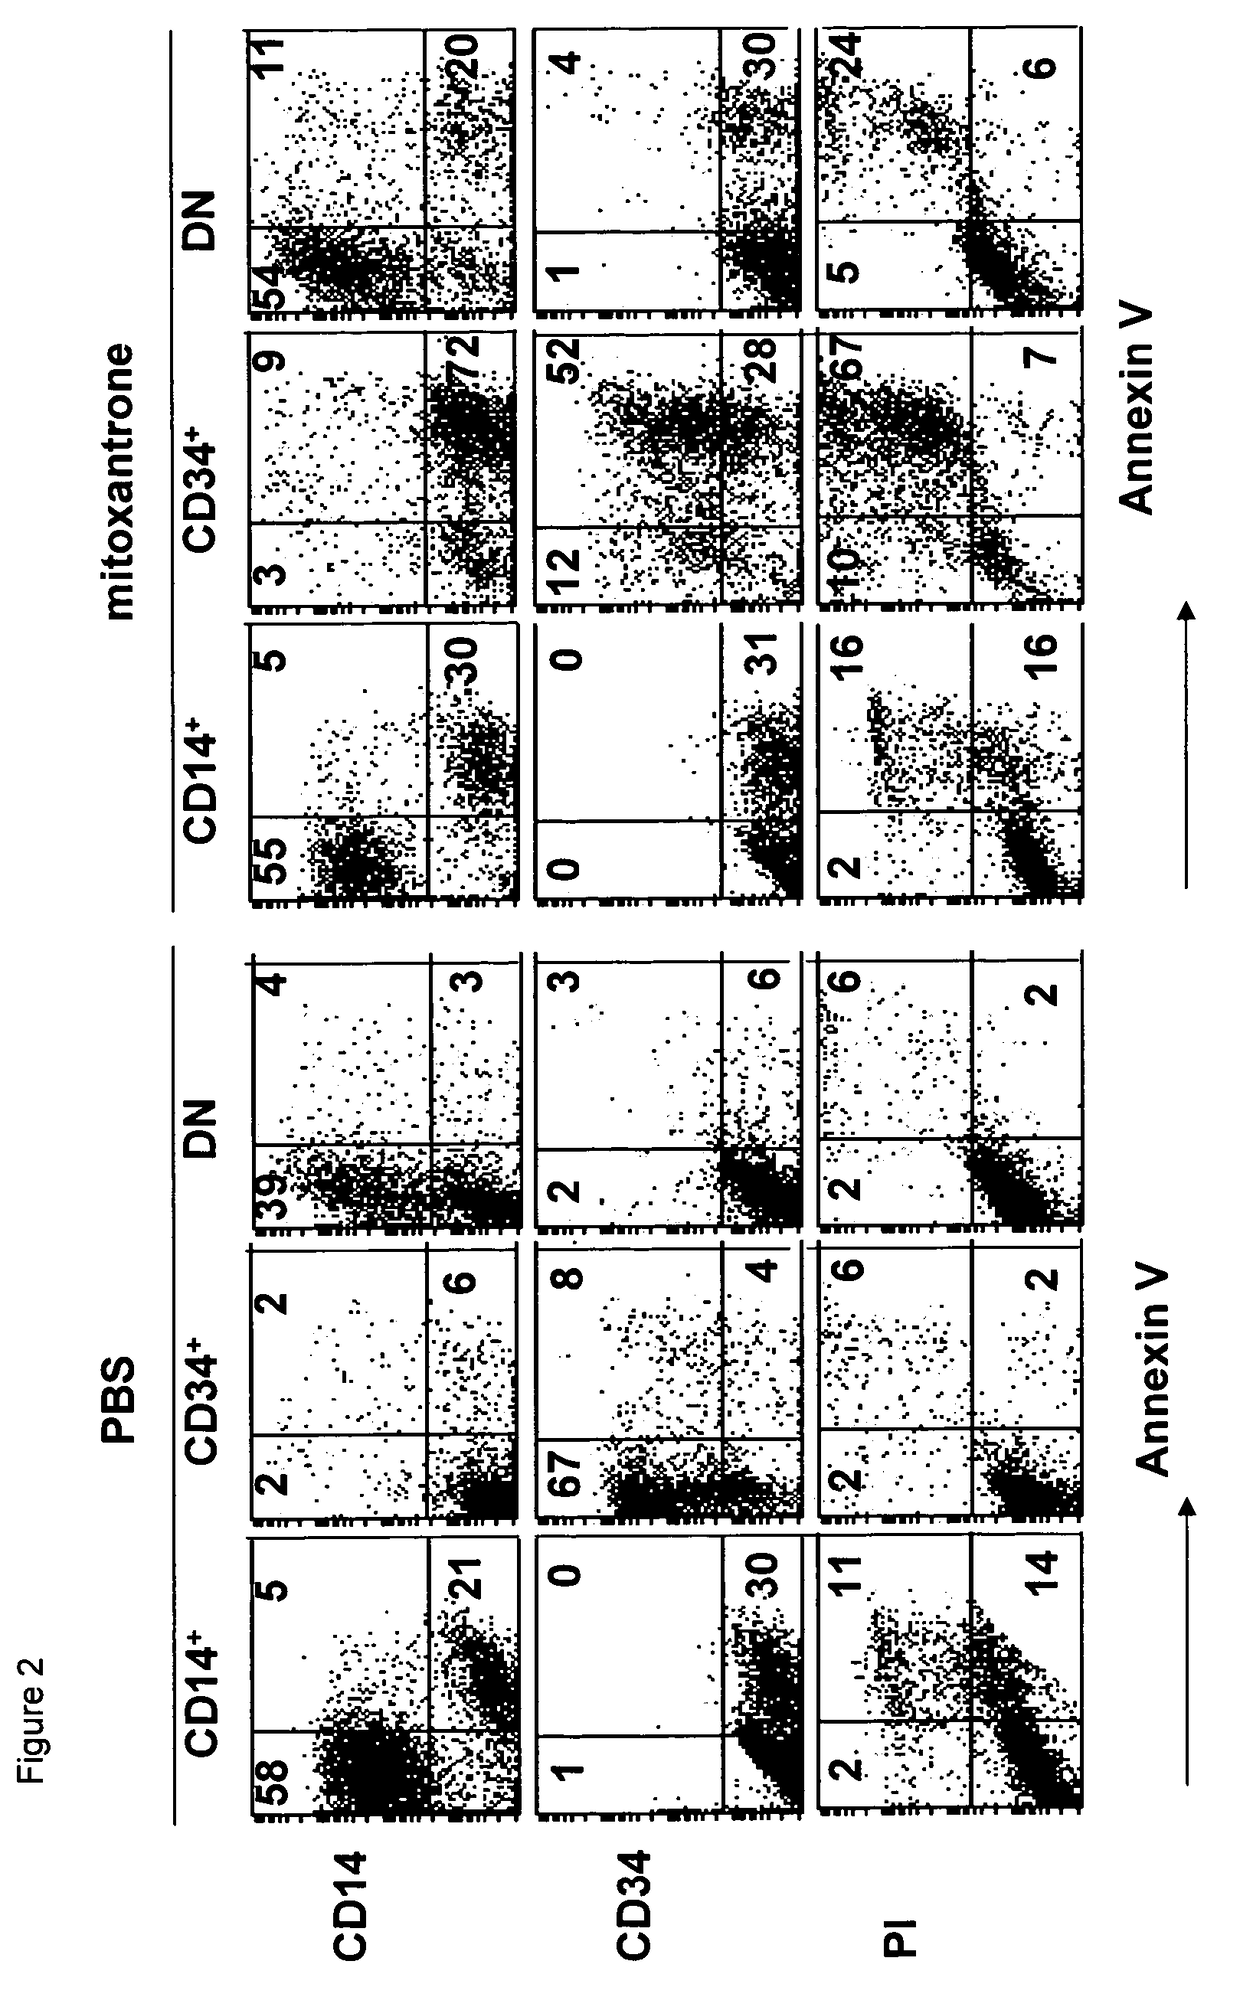 Method for inducing and accelerating cells